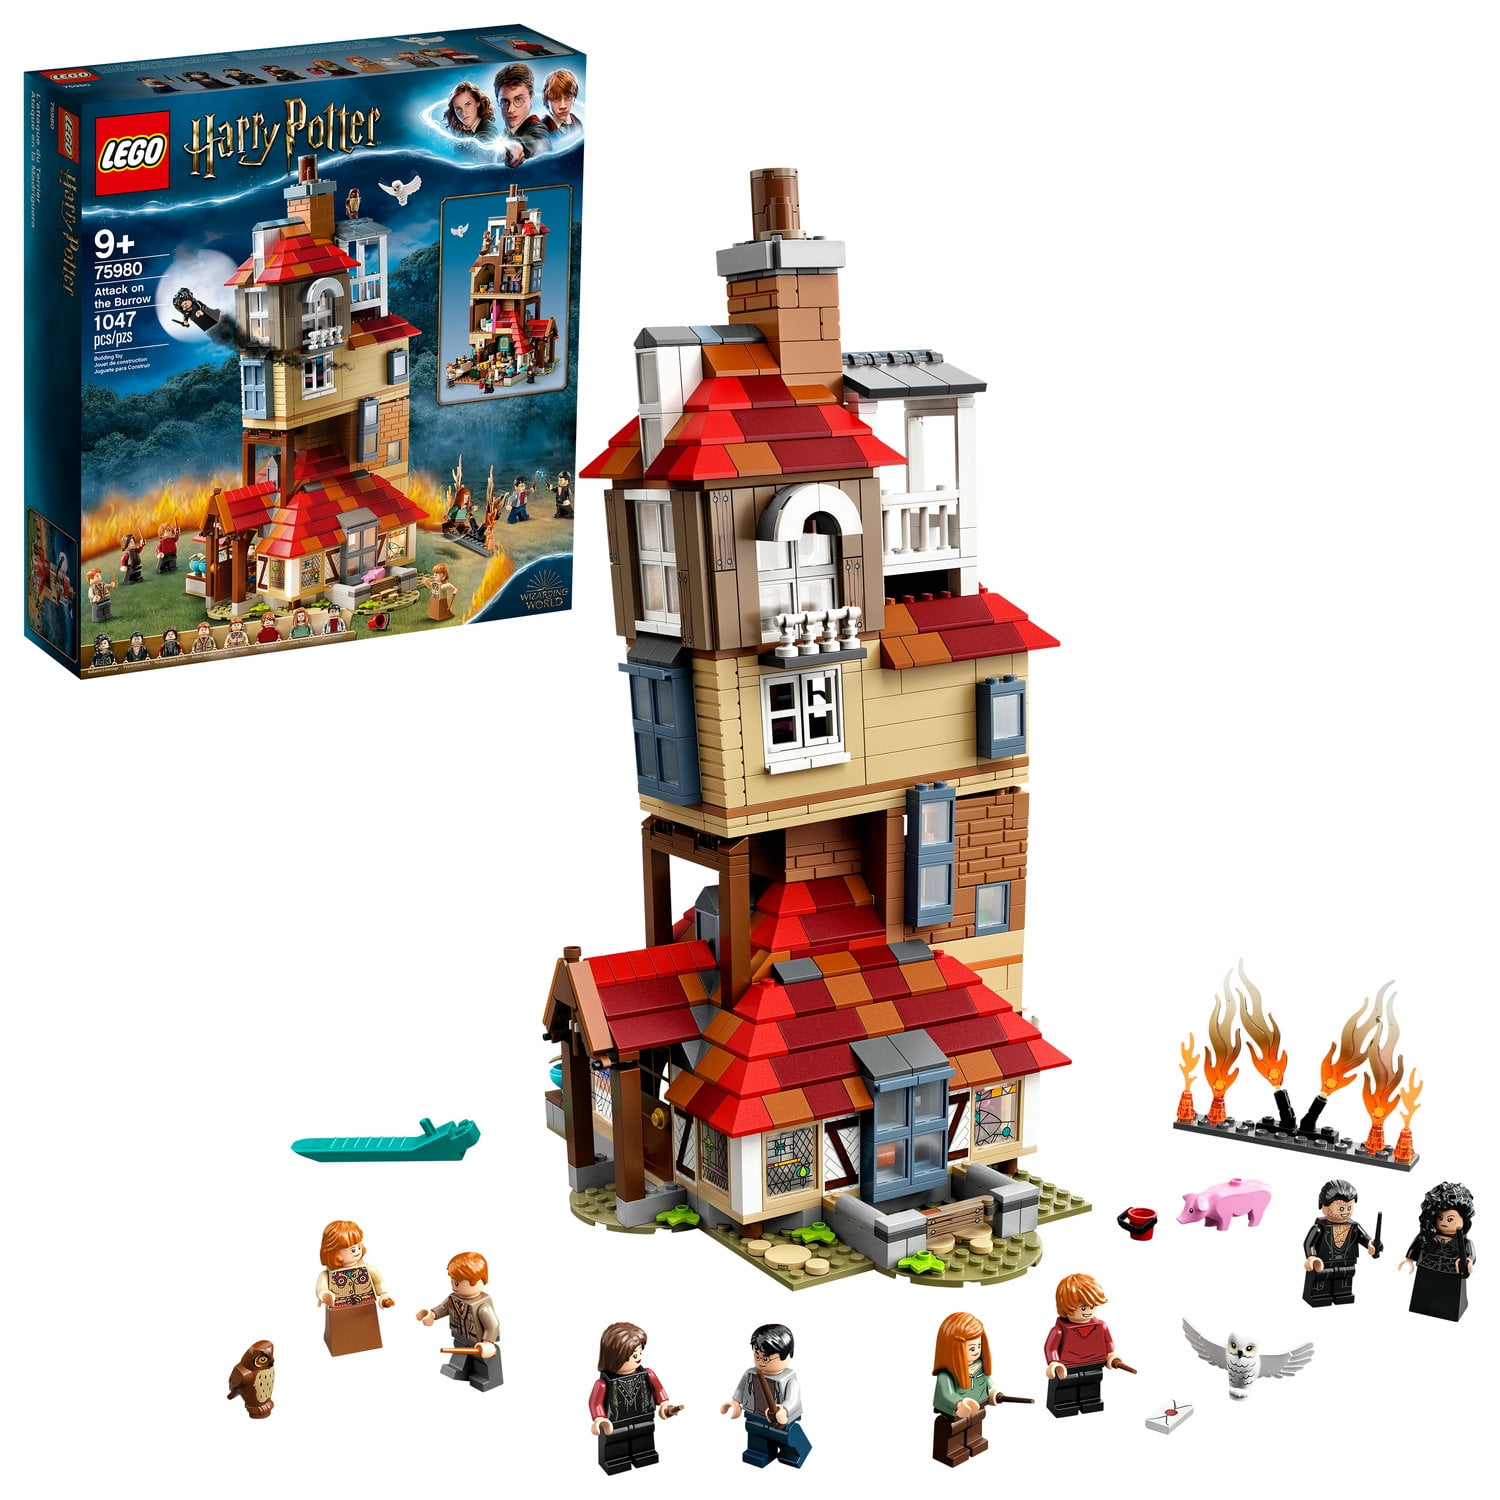 Fast Dedlivery in 7-15 days-1047pcs Magic Potter Attack On The Burrow Building 